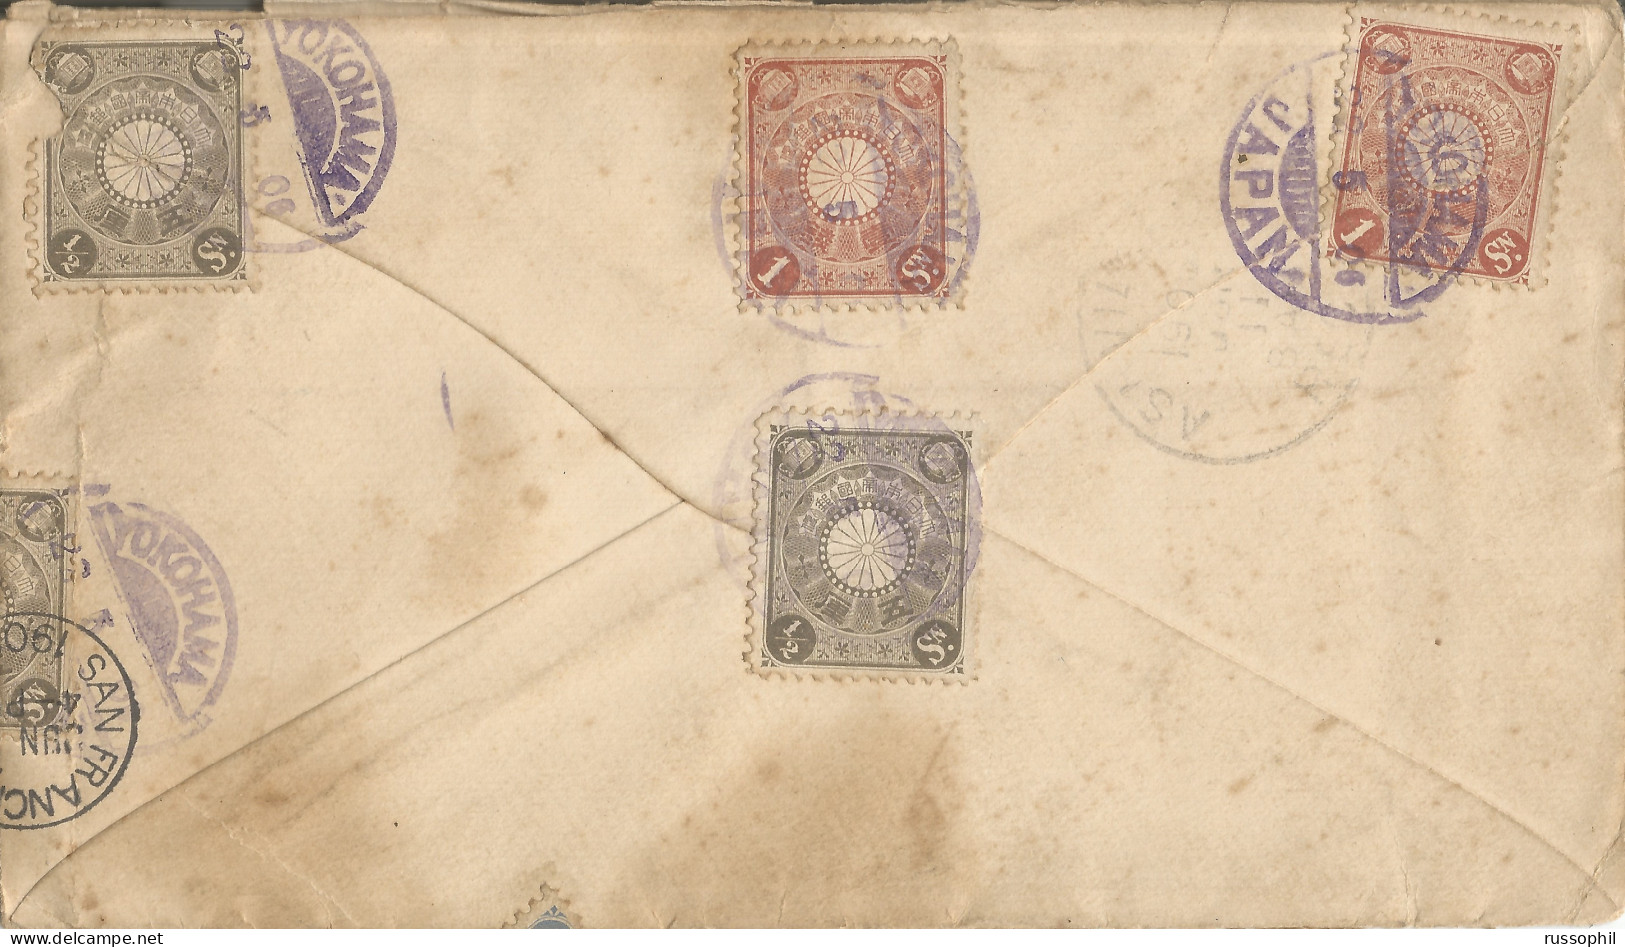 JAPAN - SPECTACULAR 20 SEN 21 STAMP FOUR COLOUR FRANKING ON COVER FROM YOKOHAMA TO THE US - 1906 - Briefe U. Dokumente